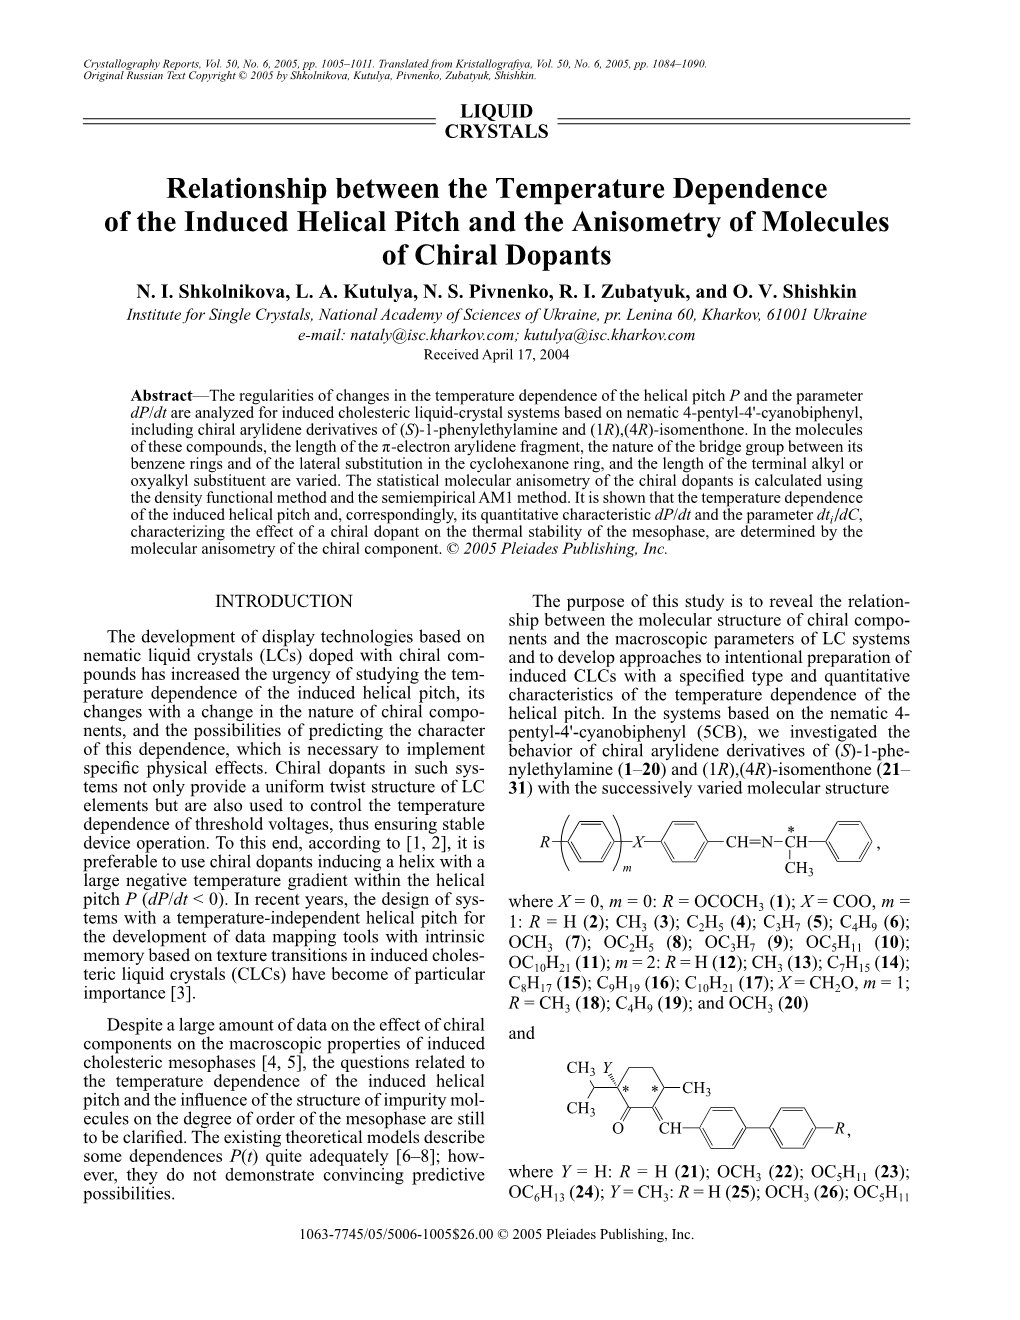 Relationship Between the Temperature Dependence of the Induced Helical Pitch and the Anisometry of Molecules of Chiral Dopants N